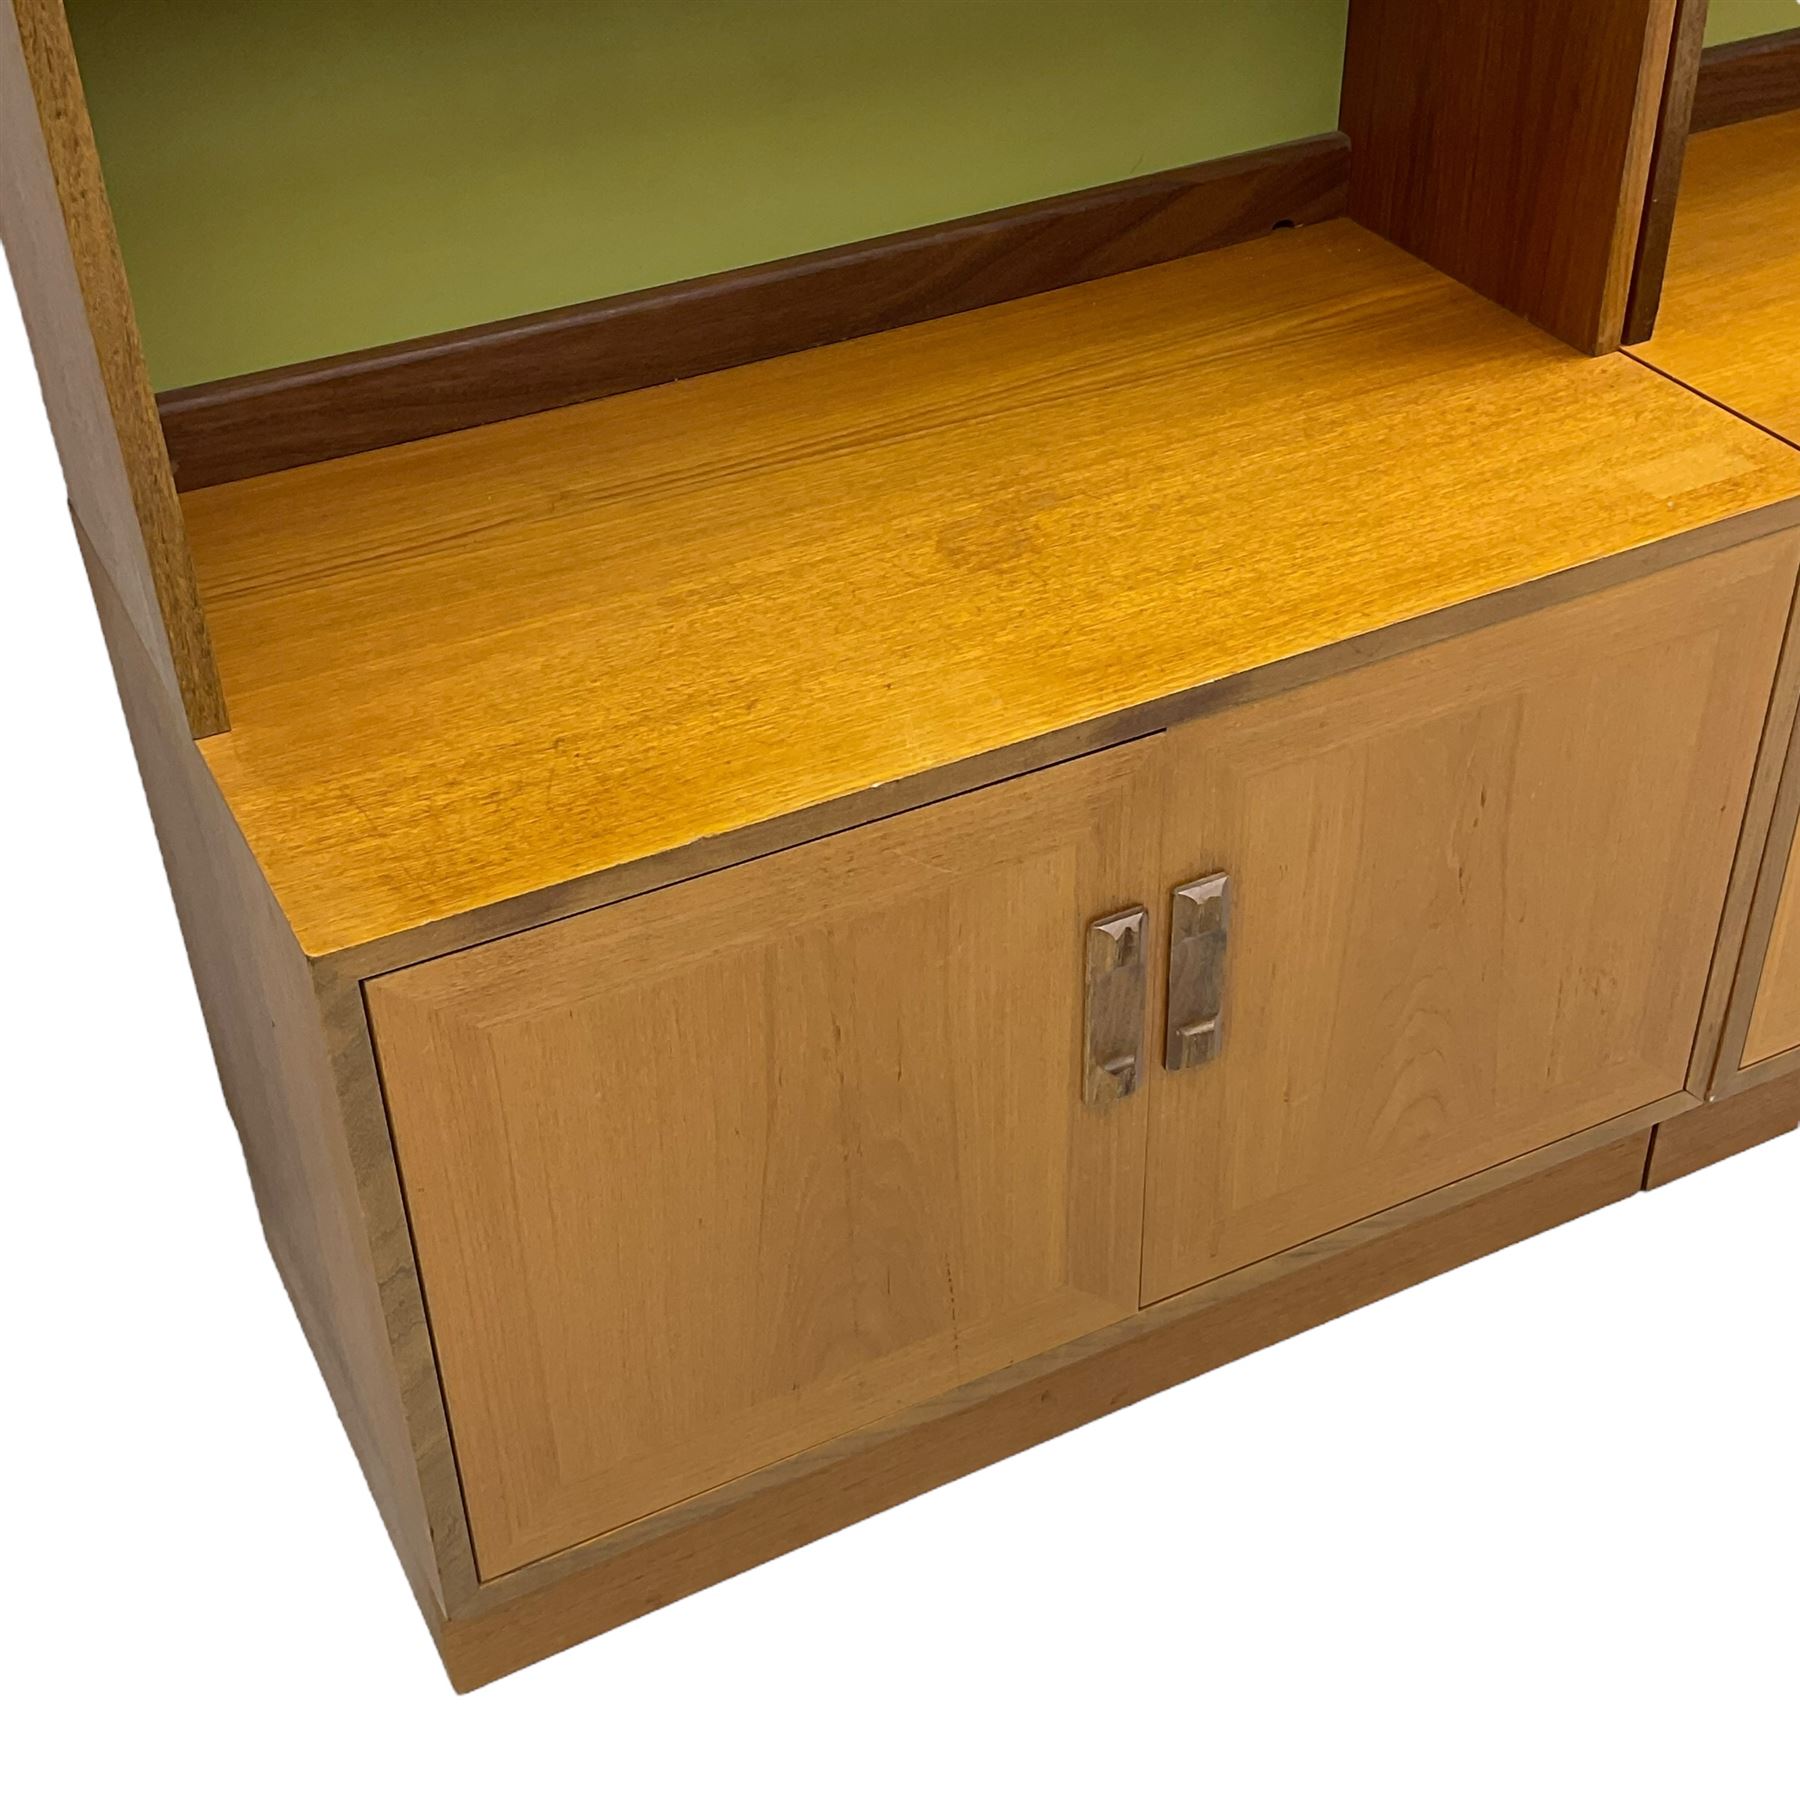 G-Plan - mid-20th century teak sectional wall unit - Image 6 of 6